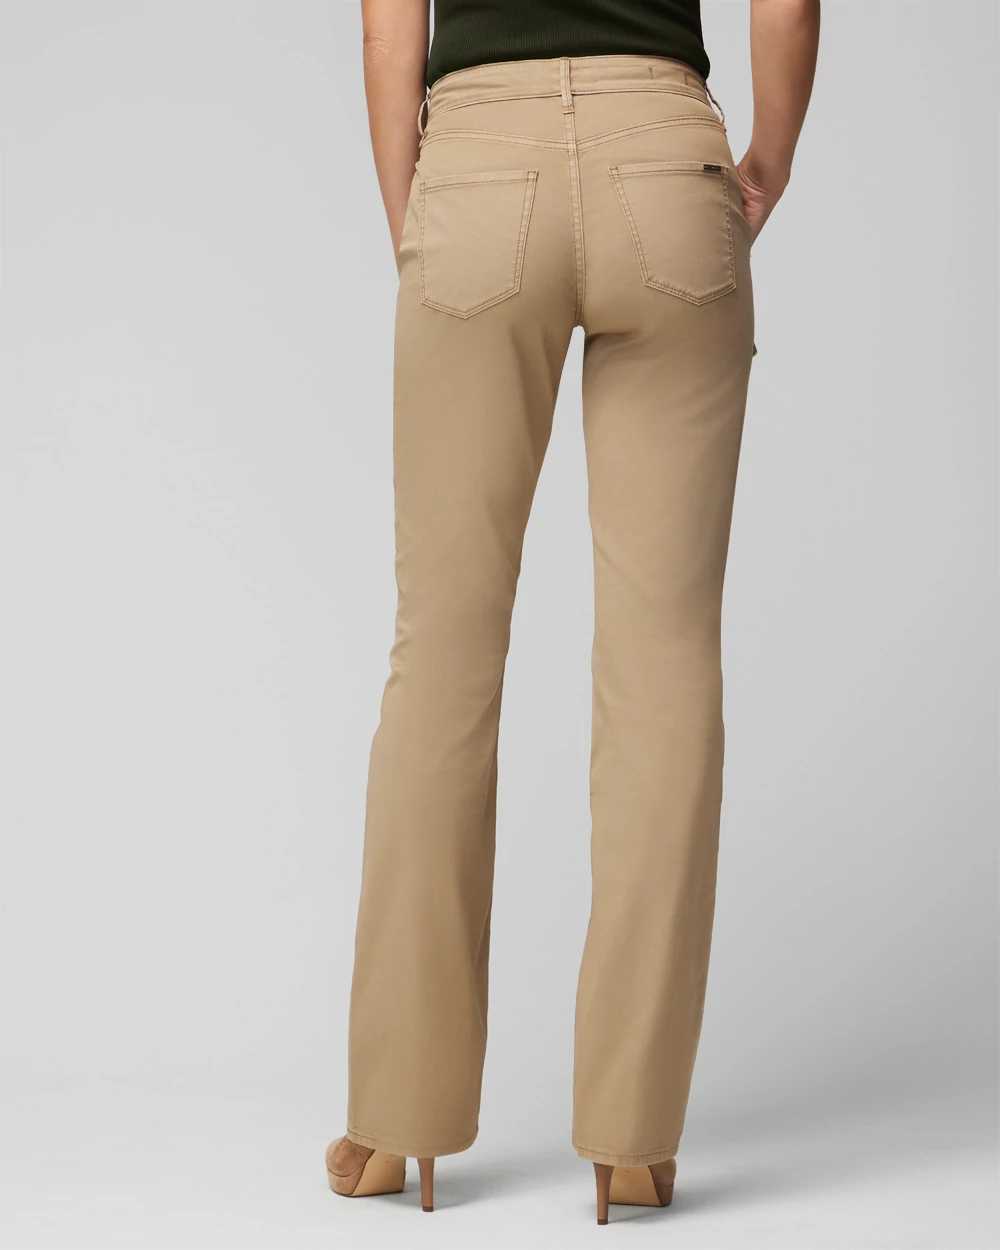 High Rise Pret Cargo Skinny Flare Jeans click to view larger image.